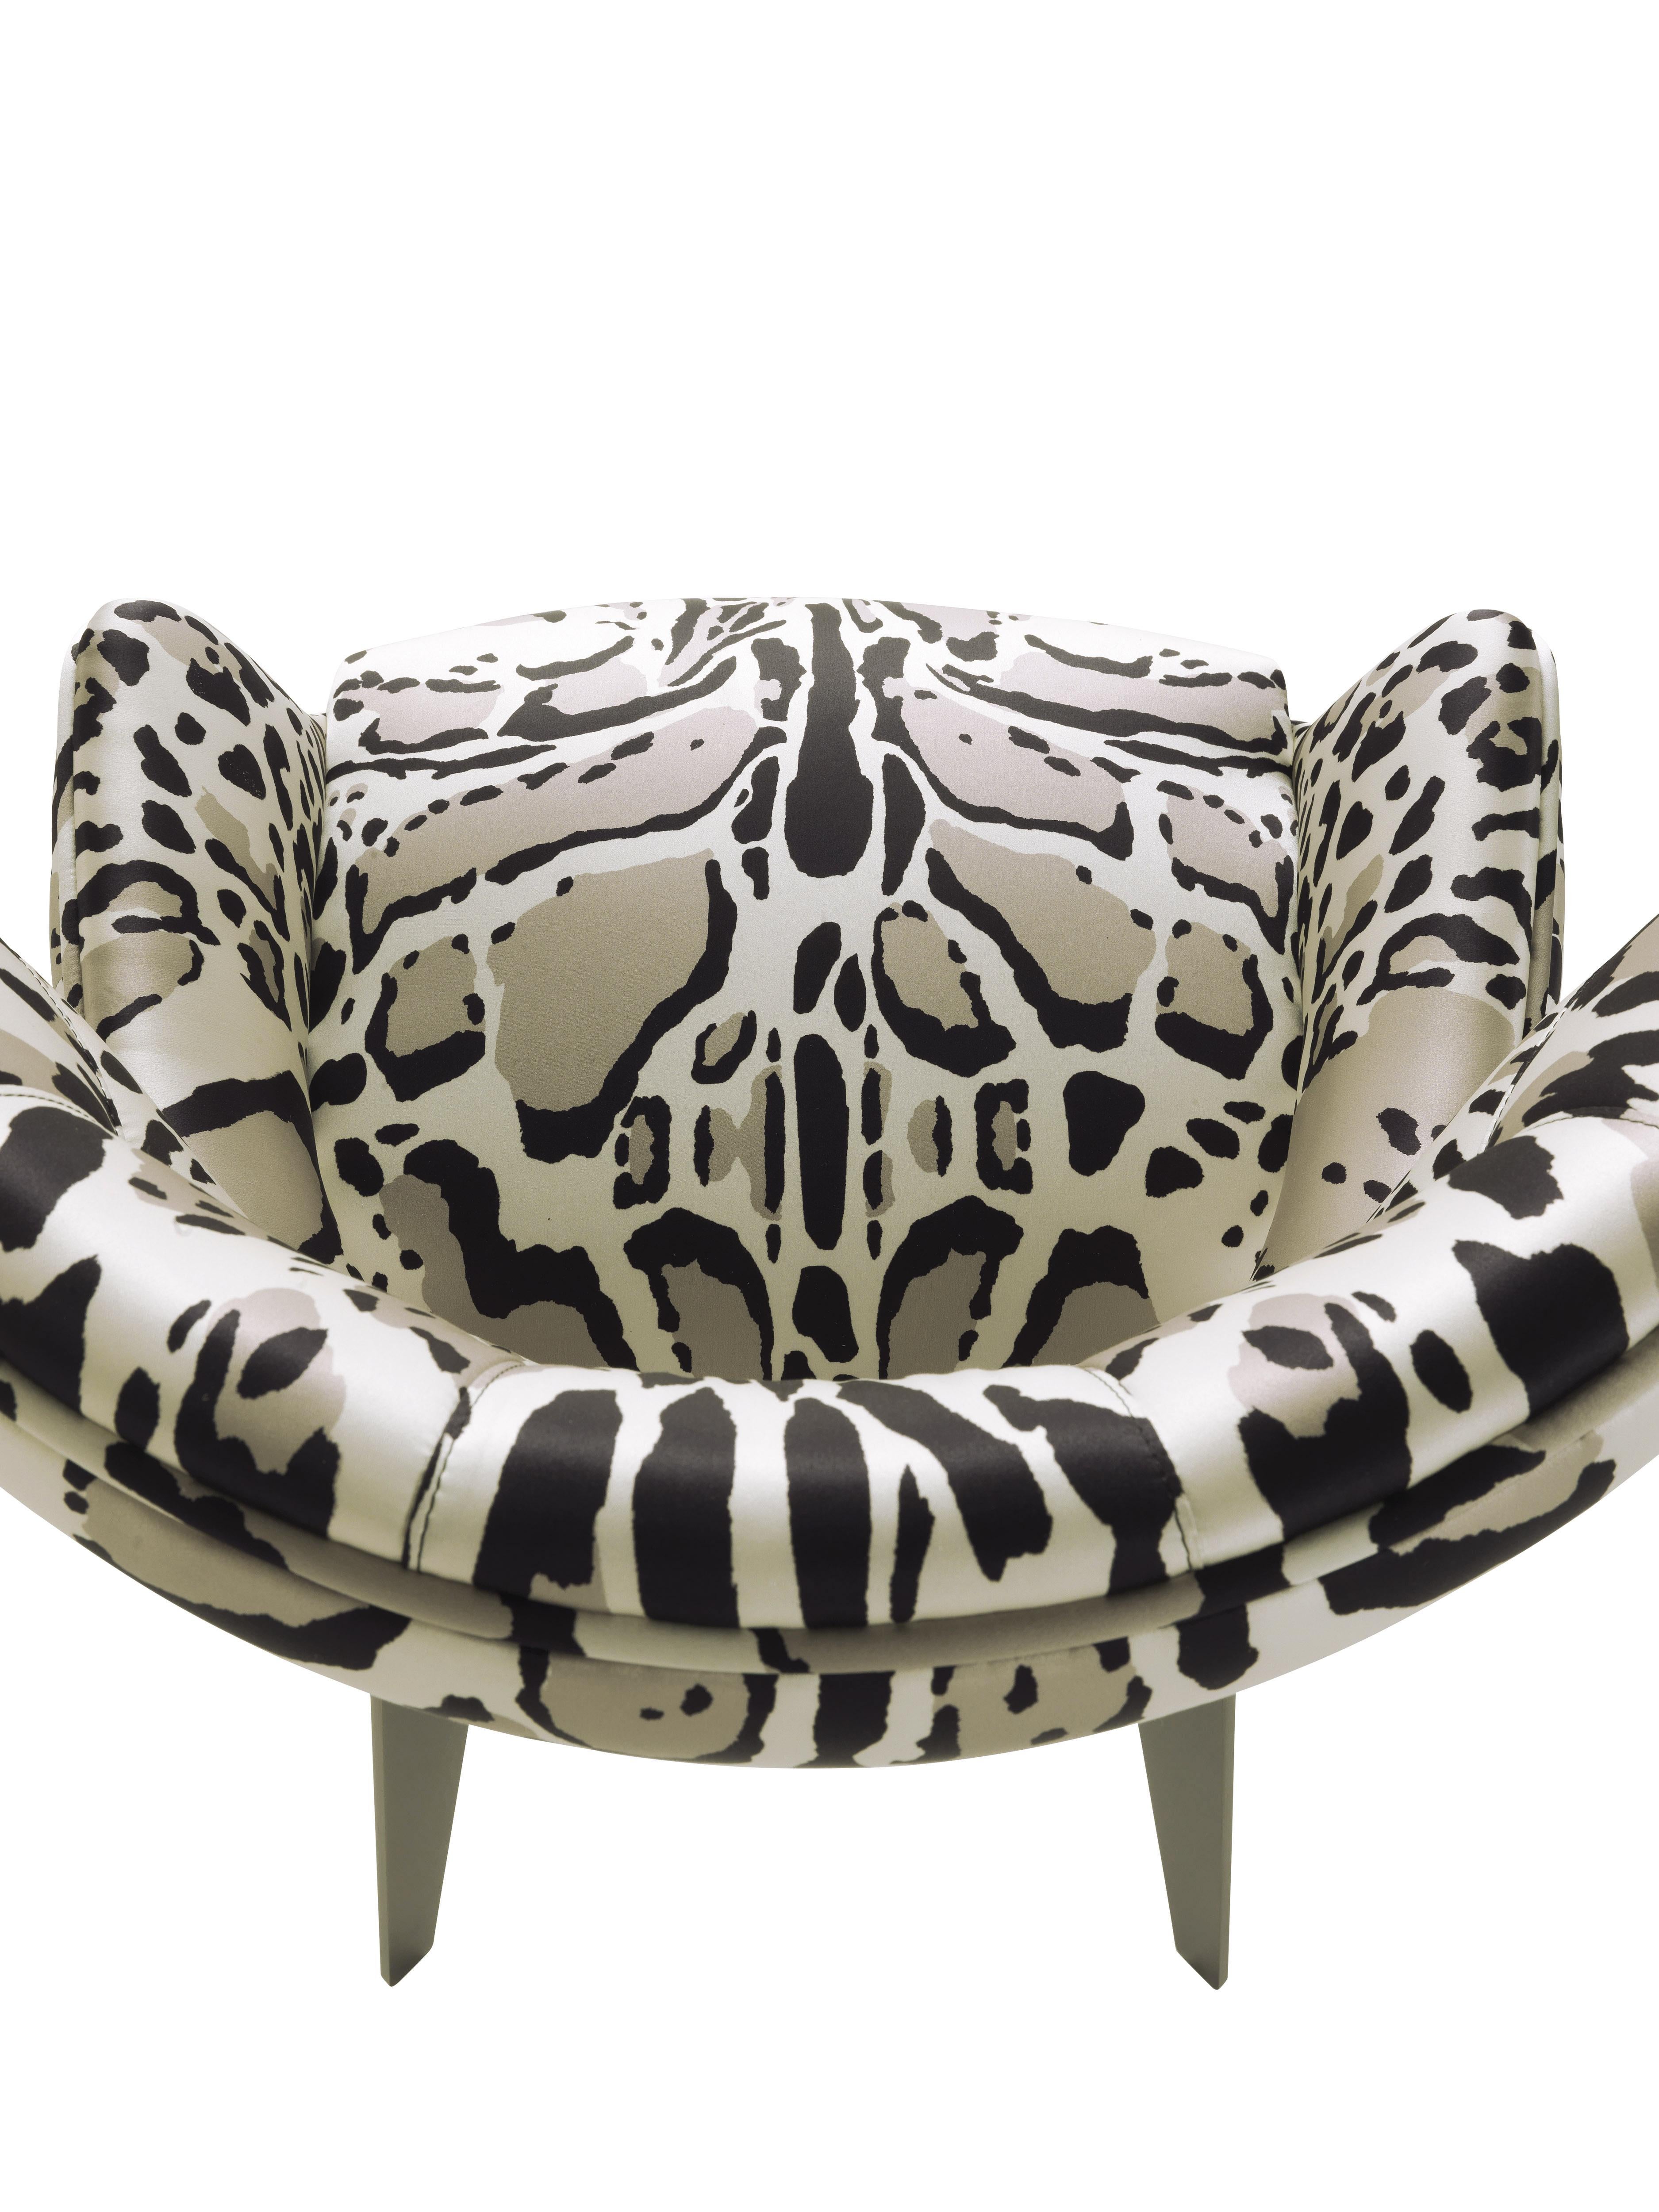 21st Century Maclaine Chair in Fabric by Roberto Cavalli Home Interiors In New Condition For Sale In Cantù, Lombardia